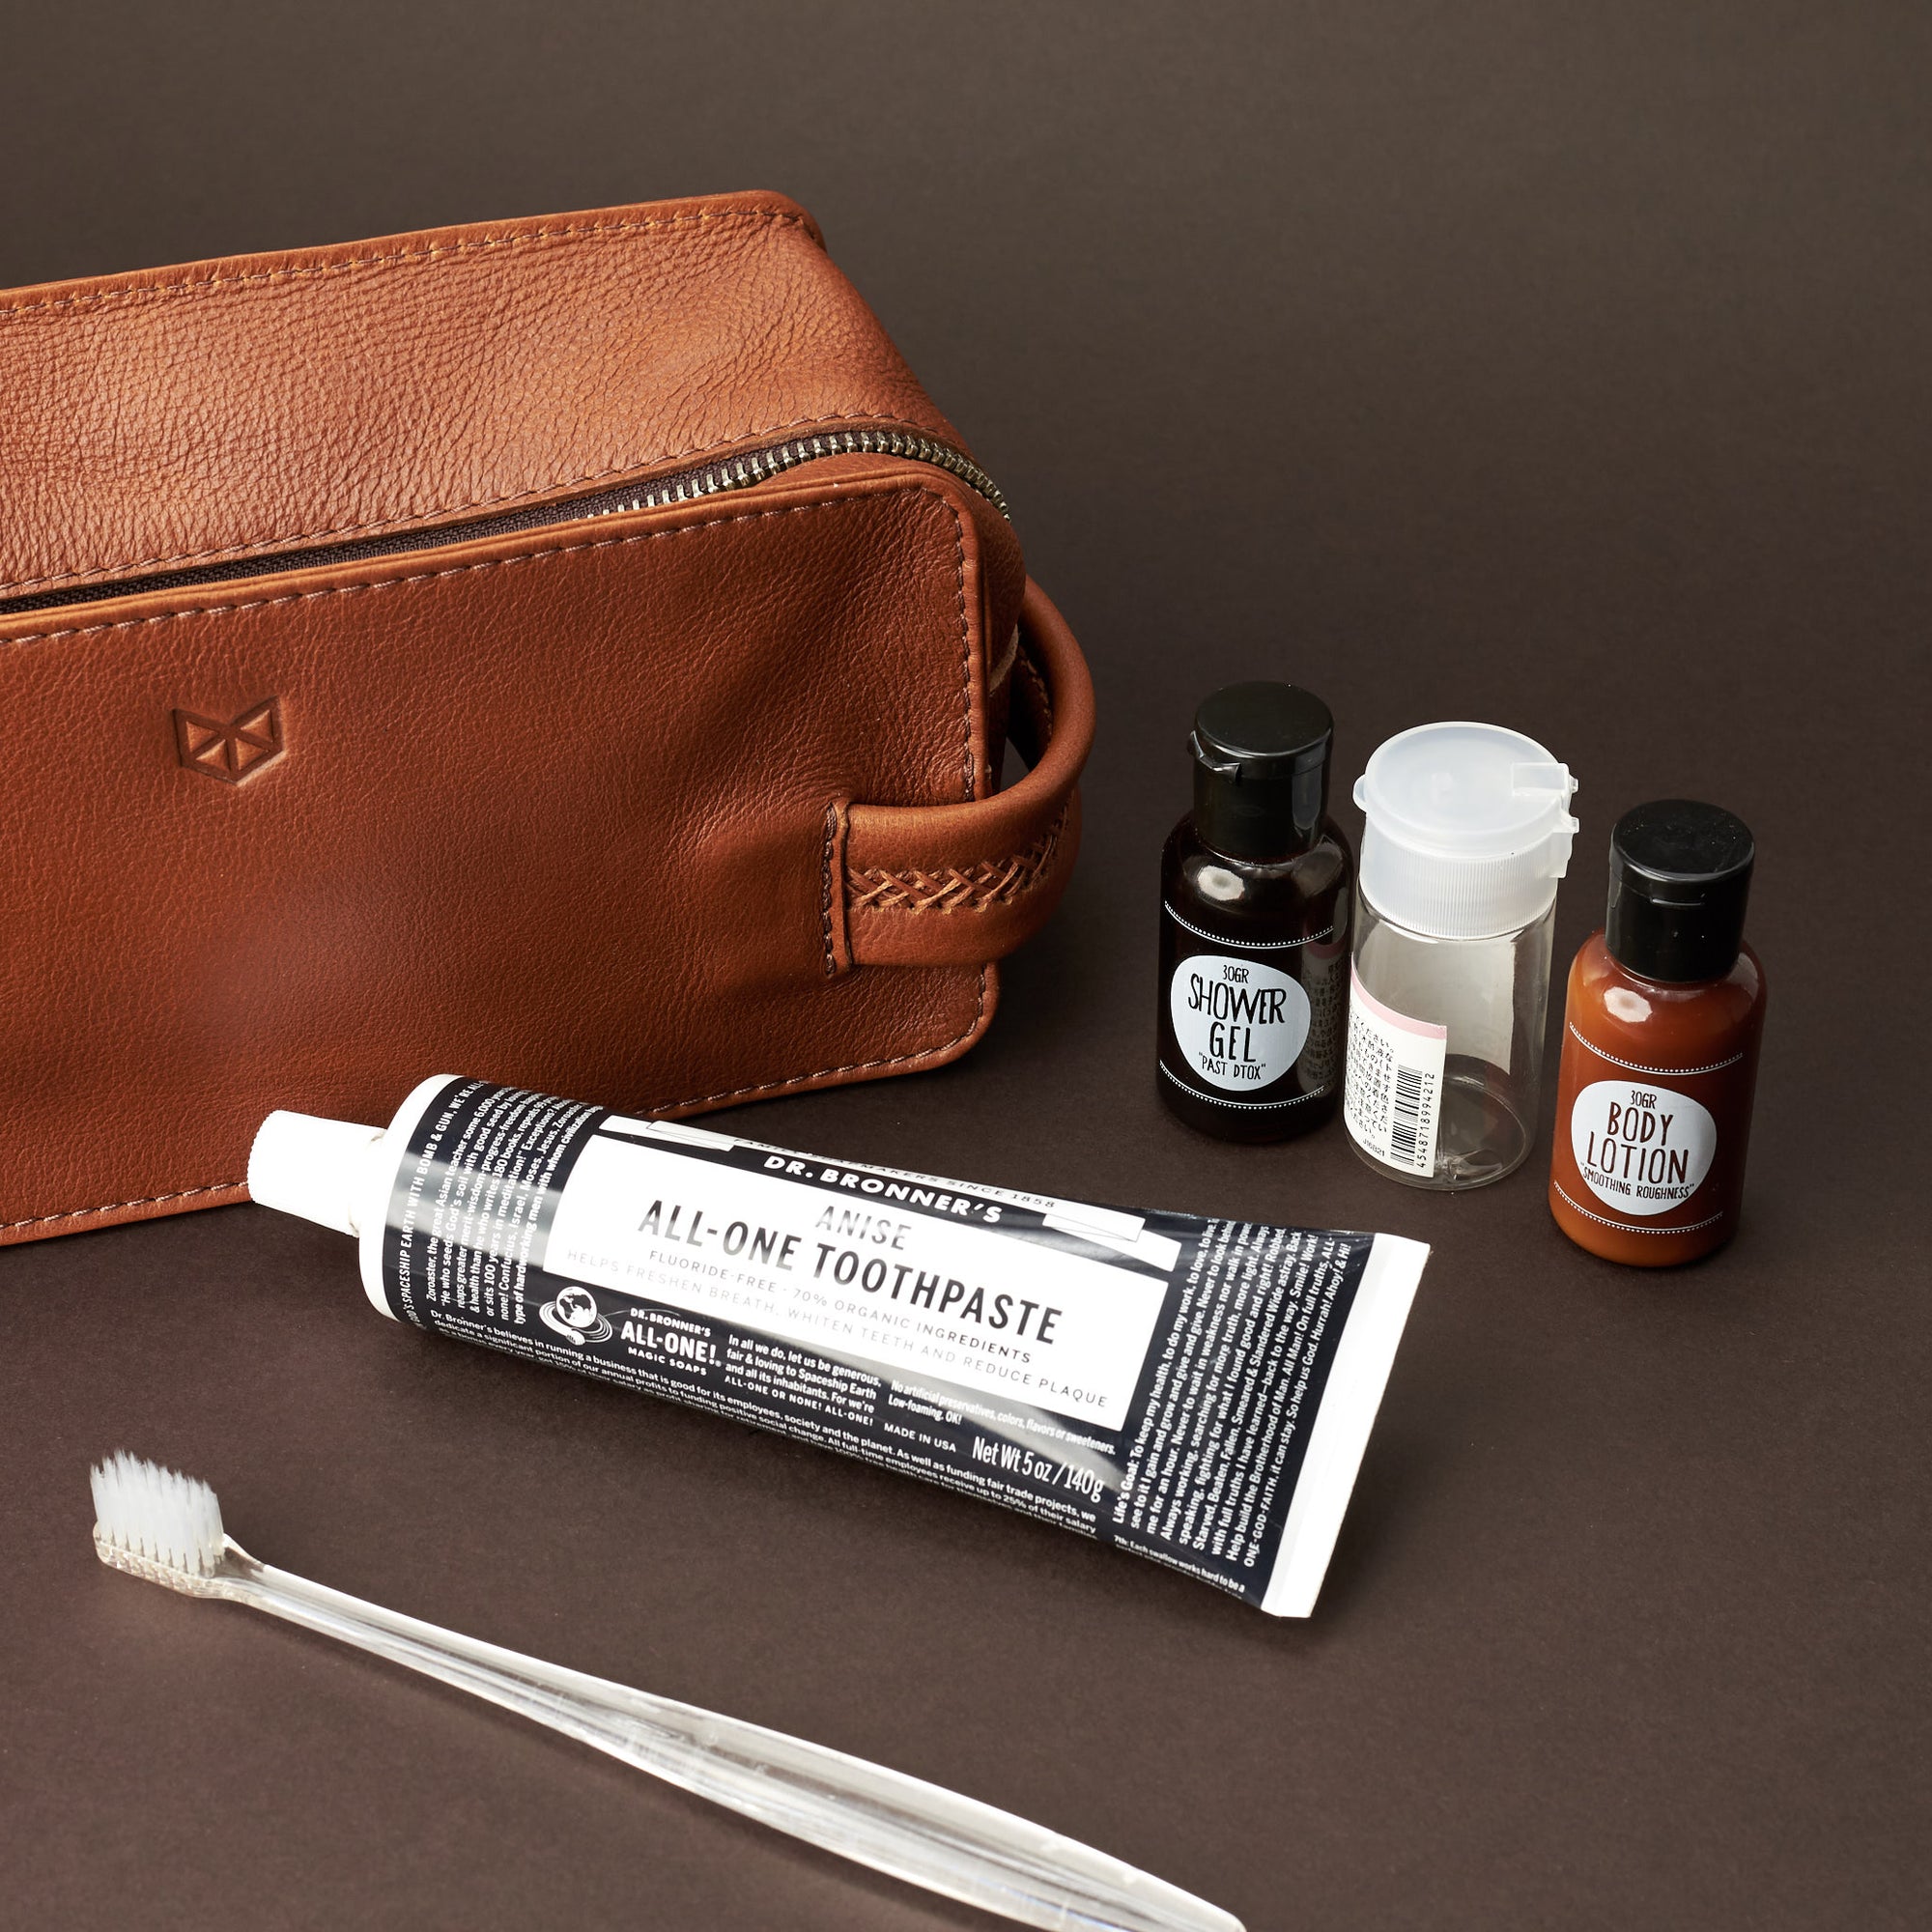 Styling. Tan leather toiletry, shaving bag with hand stitched handle. Groomsmen gifts. Leather good crafted by Capra Leather 